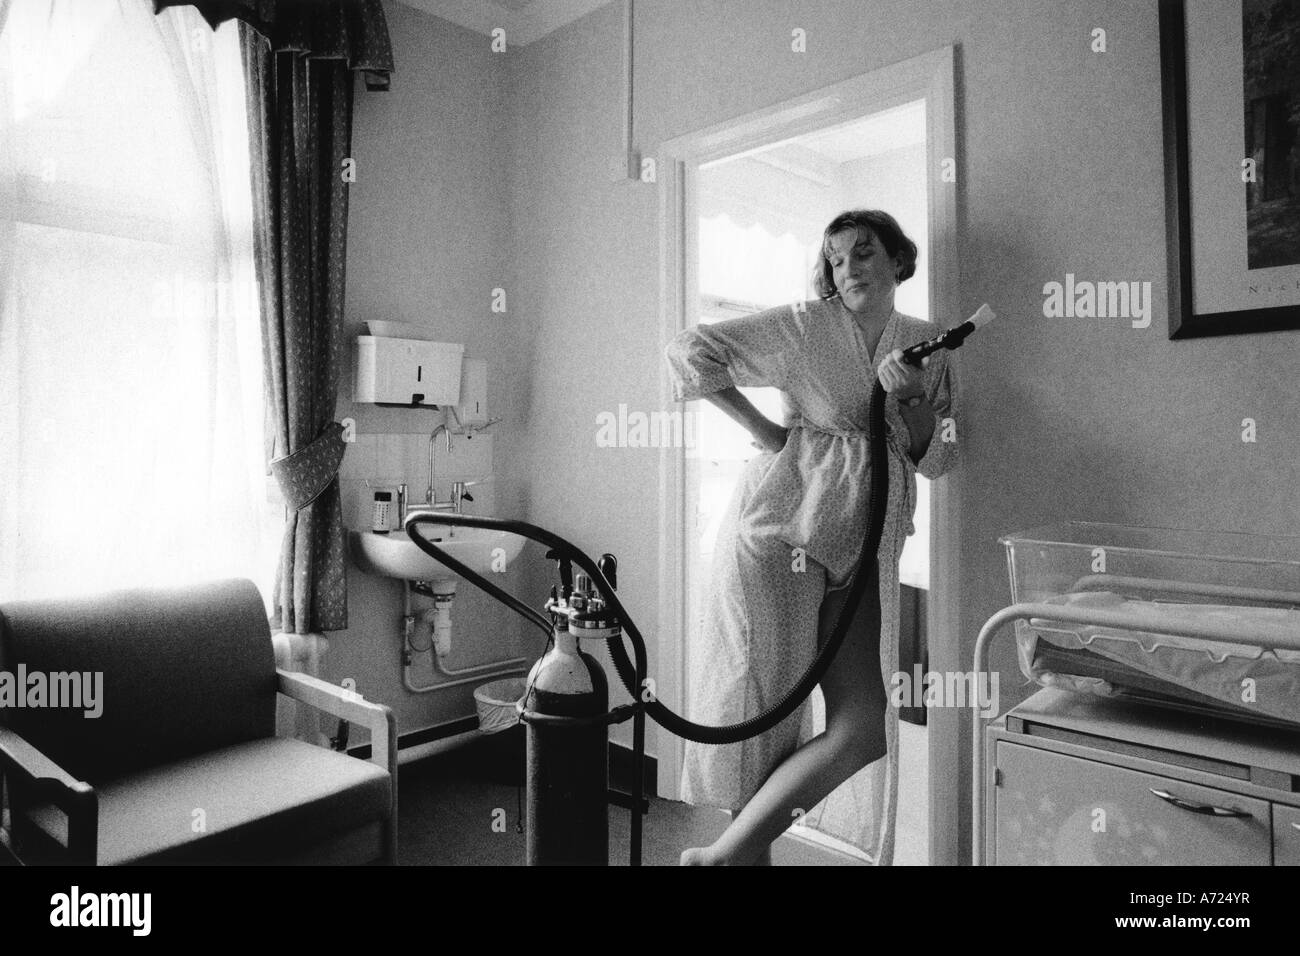 Gail taking gas and air for pain relief after 12 hours of labour standing to let gravity assist with the labour . Stock Photo